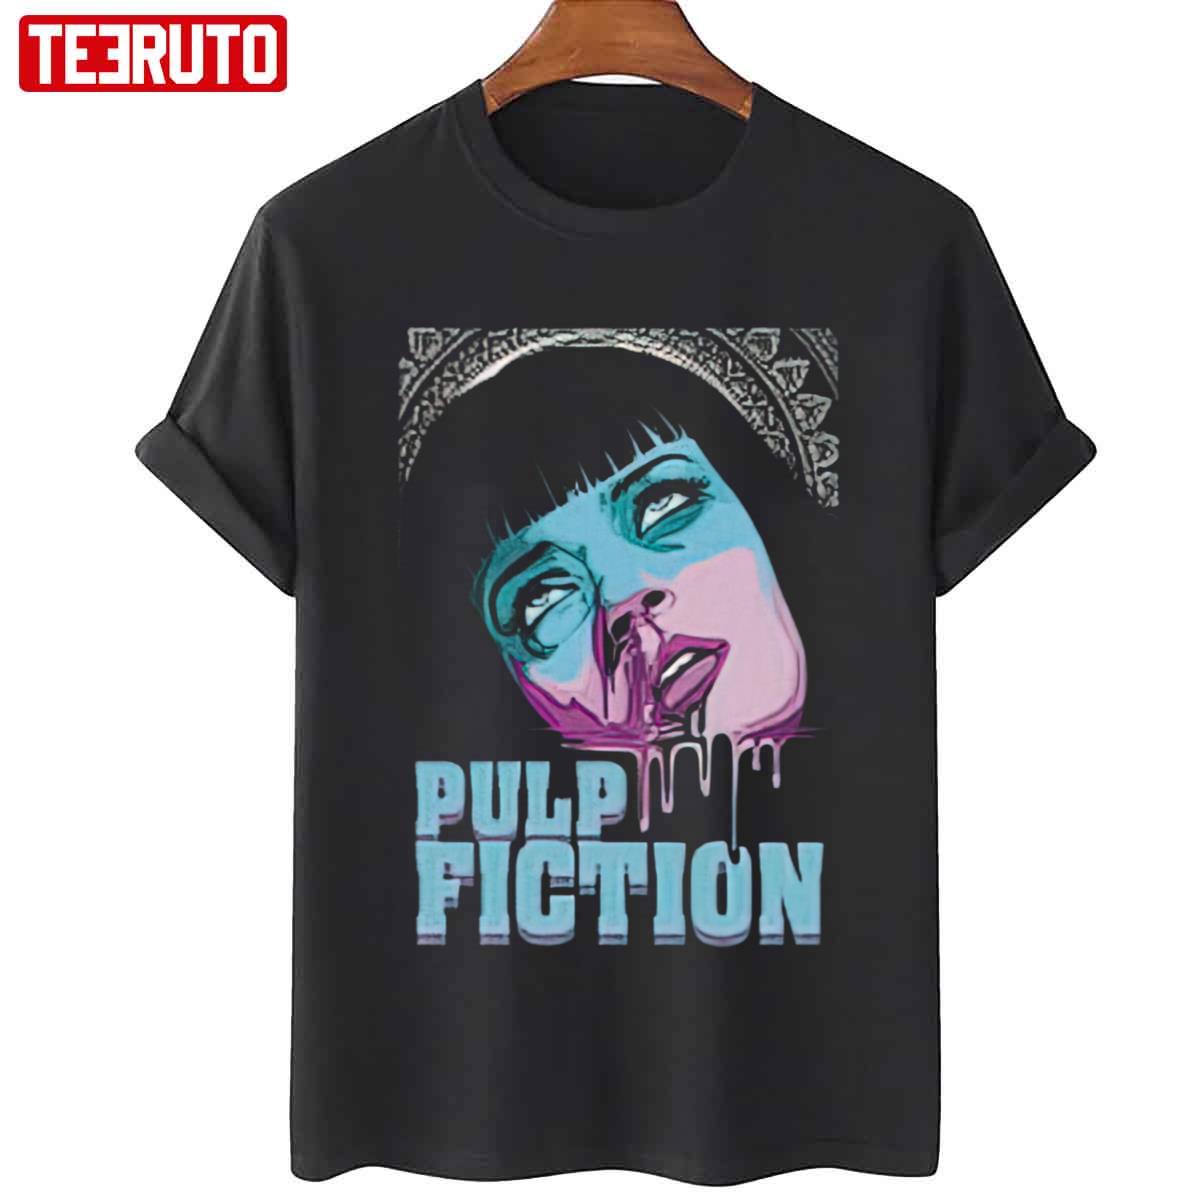 Pulp Fiction Movie Mia Wallace Printed Front Unisex Unisex T-Shirt